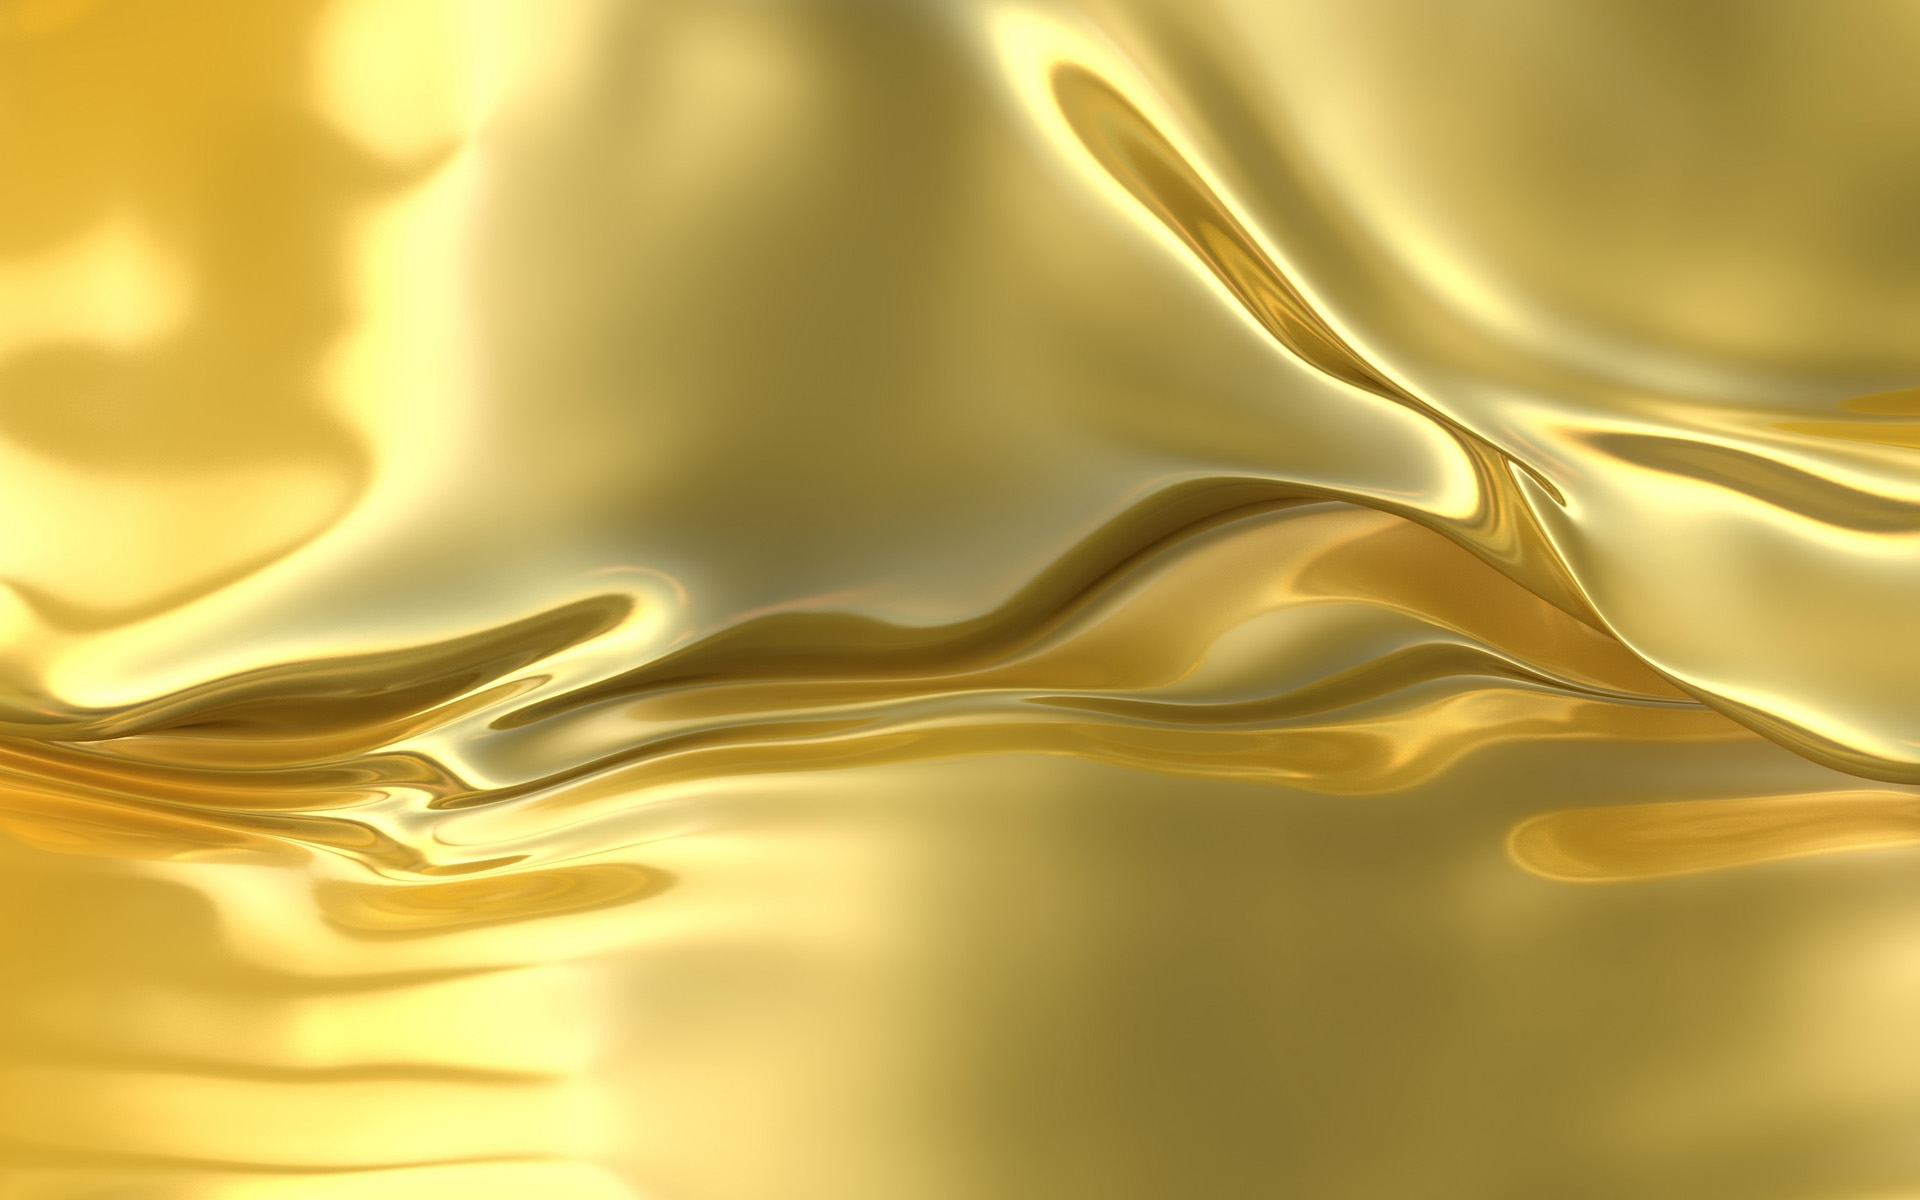 hd wallpapers golden wallpaper ouro abstract gold texture